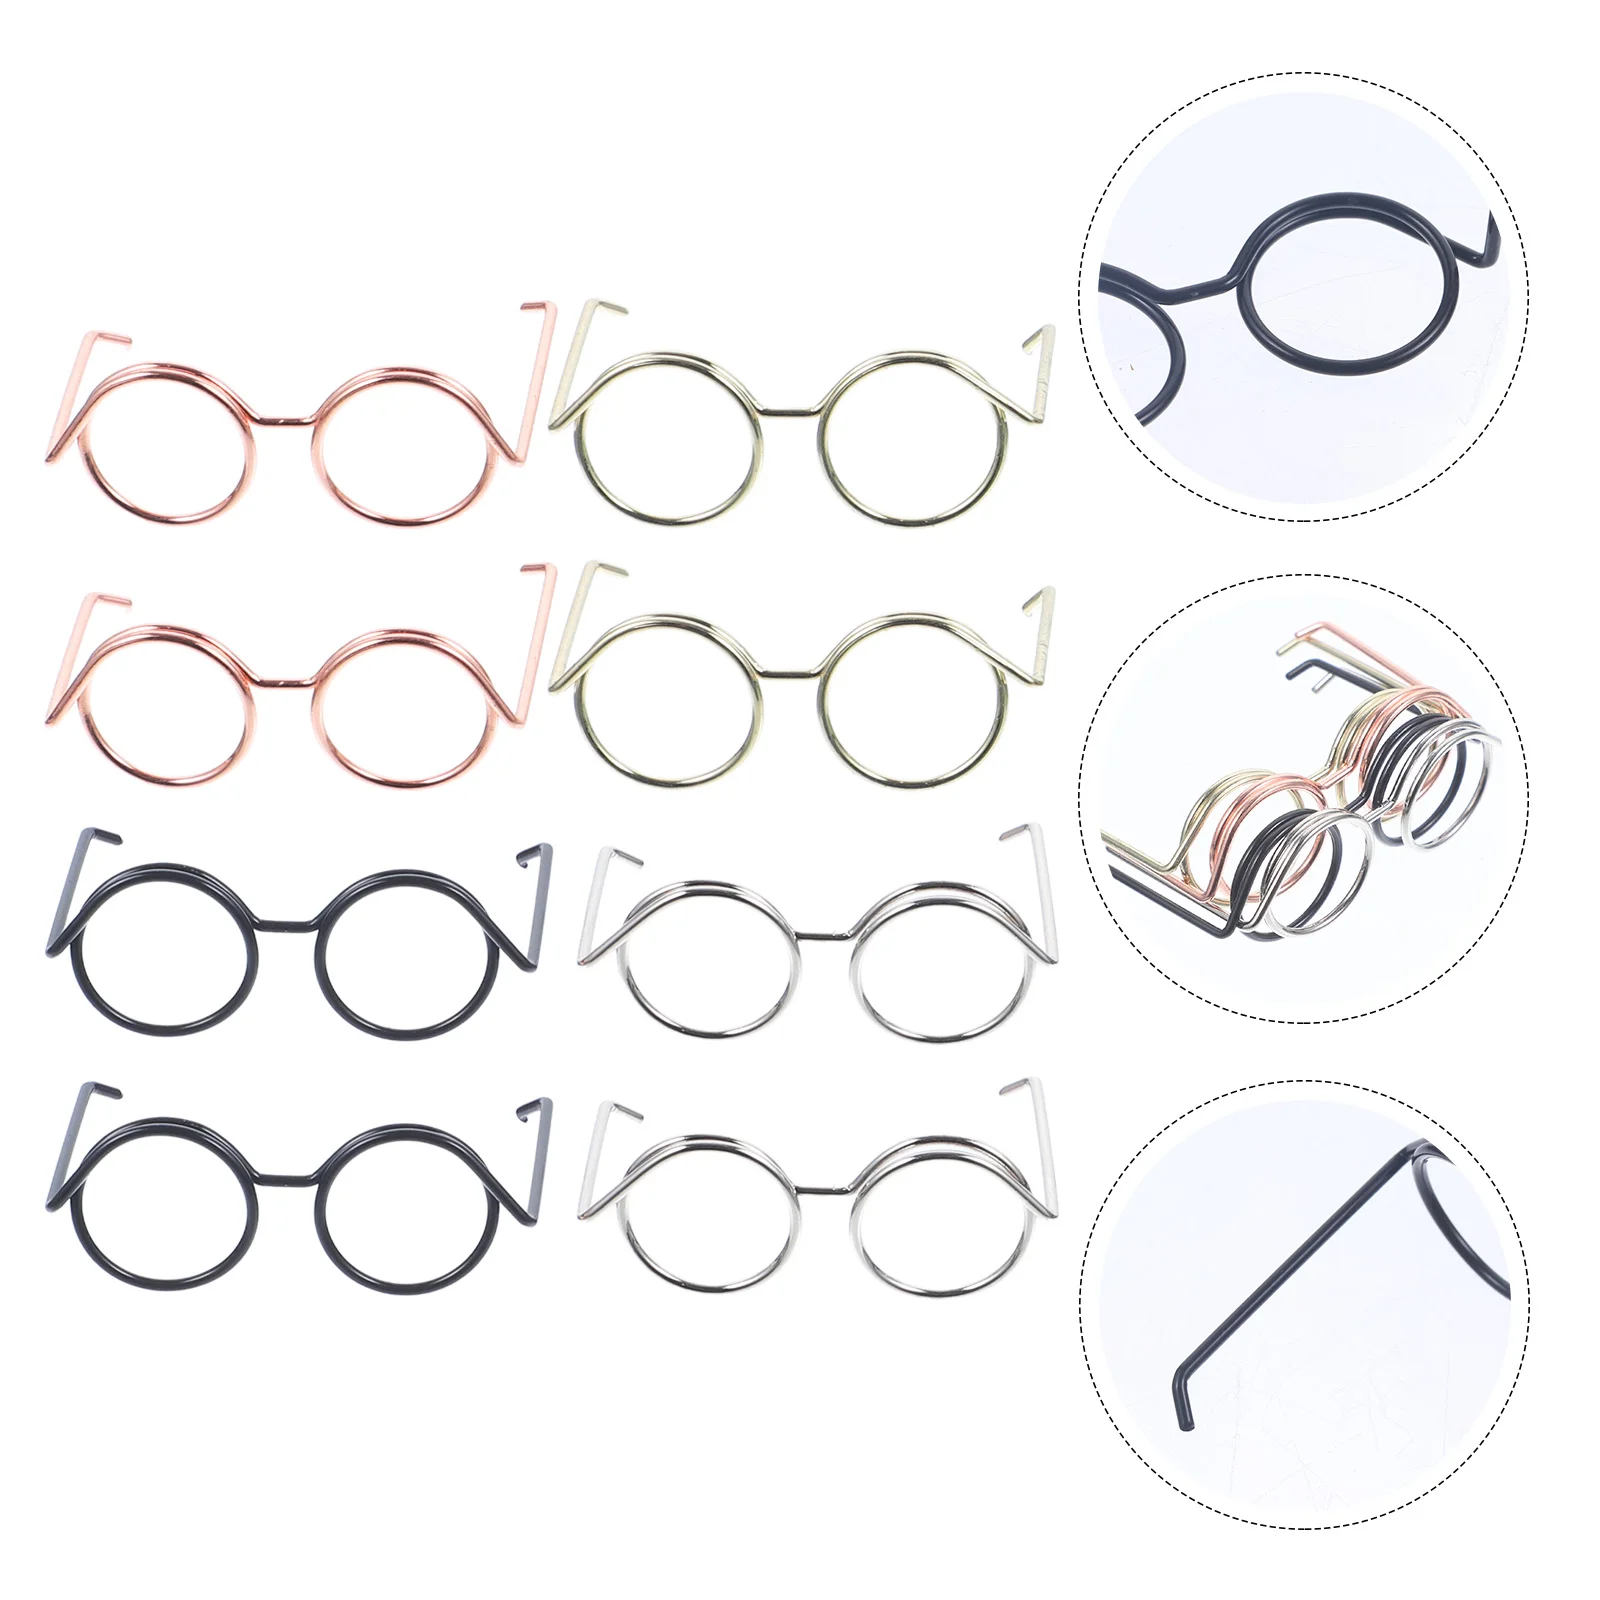 

20 Pcs Mini Glasses Costume Eyeglasses Miniature Things Tiny Dress Toys Girls Accessories Babydoll Eyes for knitted